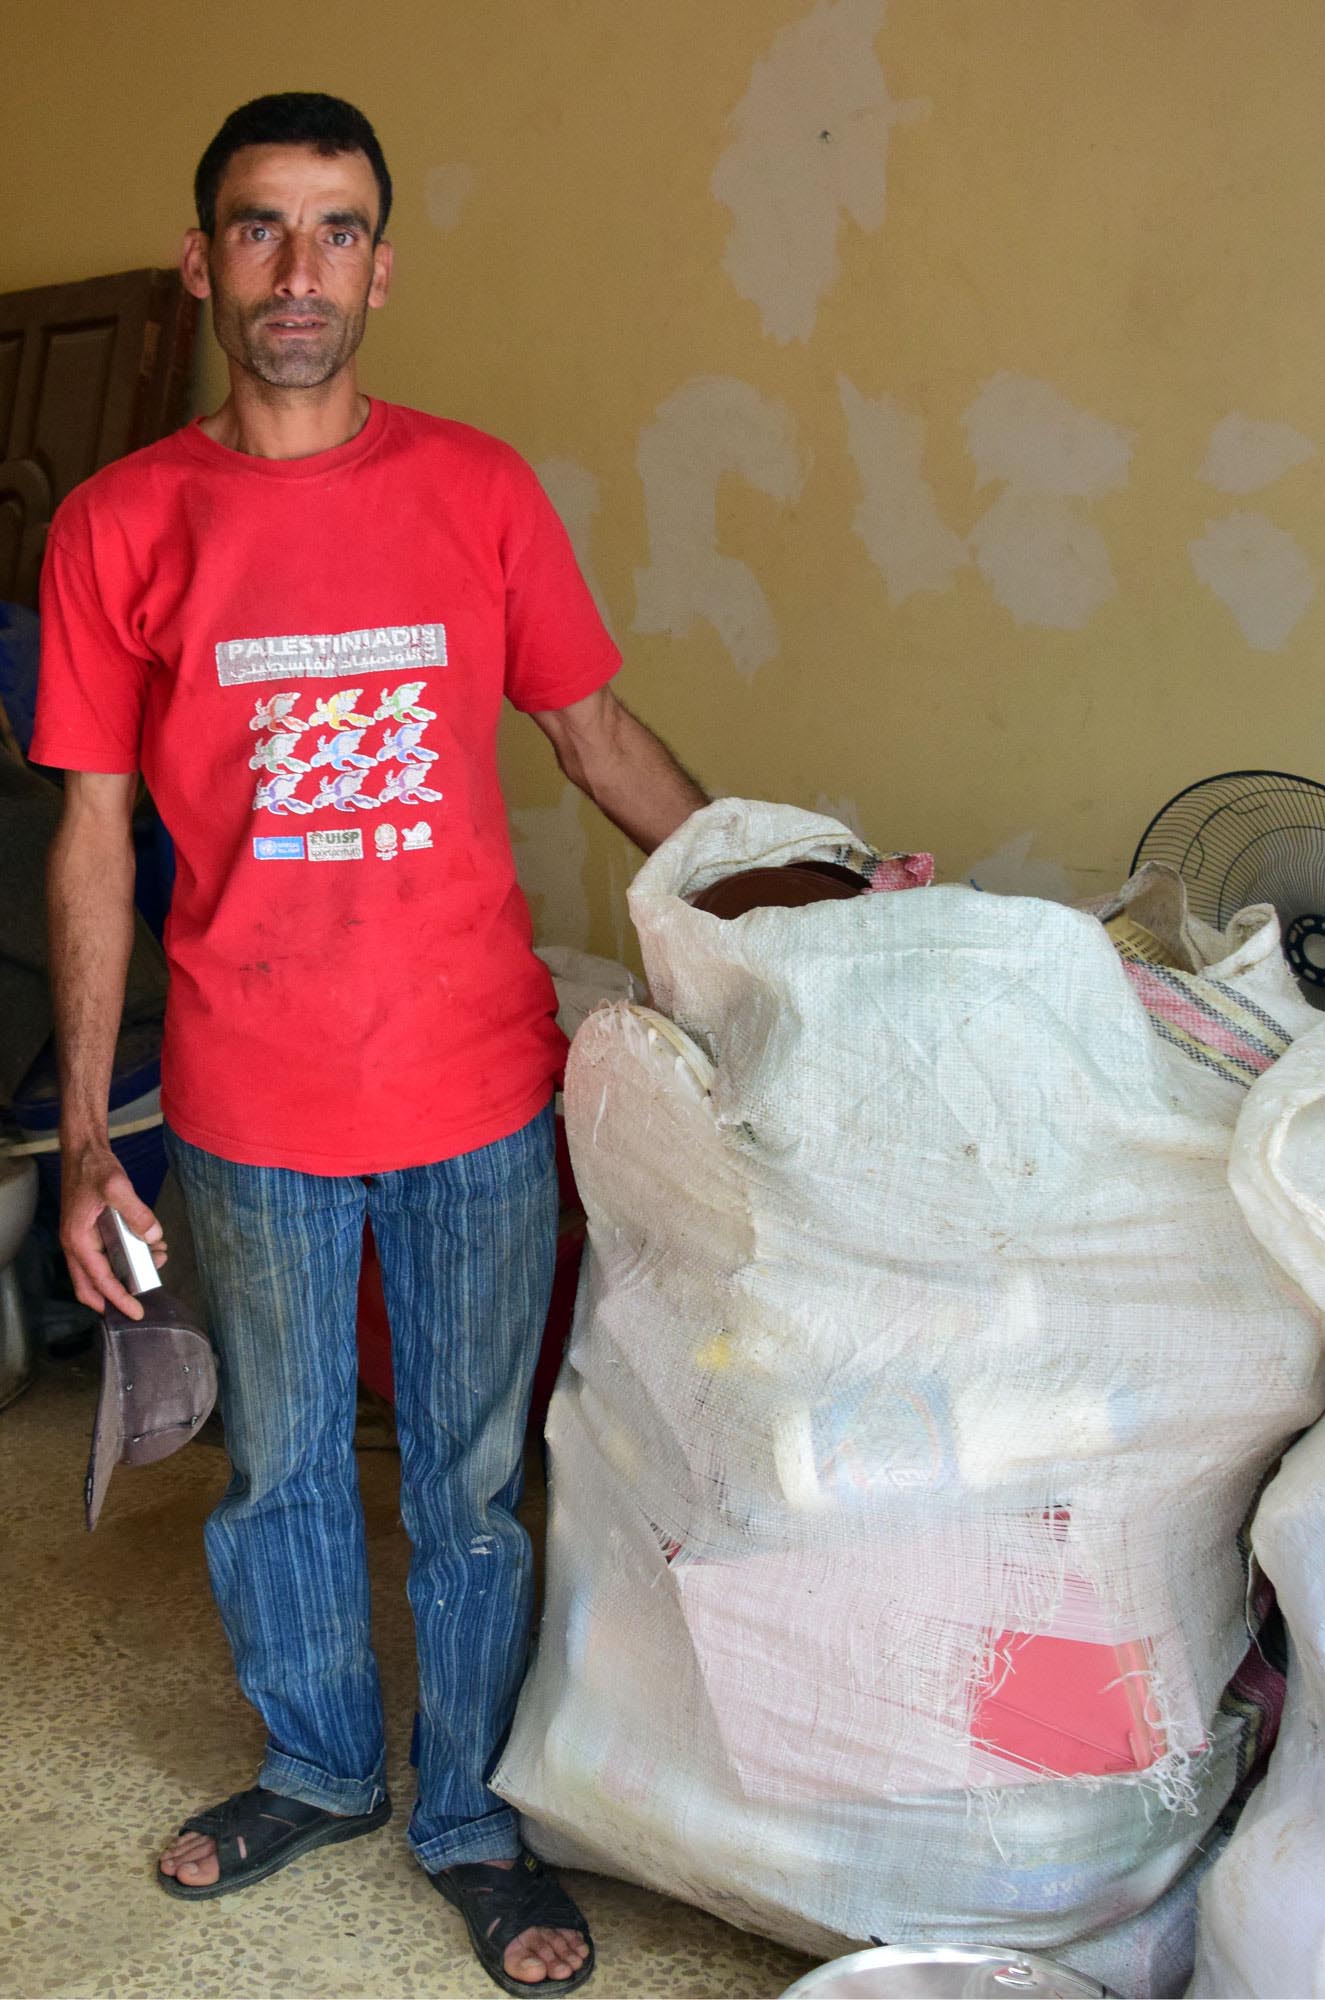 A Palestinian refugee camp recycles, making life easier for scavengers like Ayman.